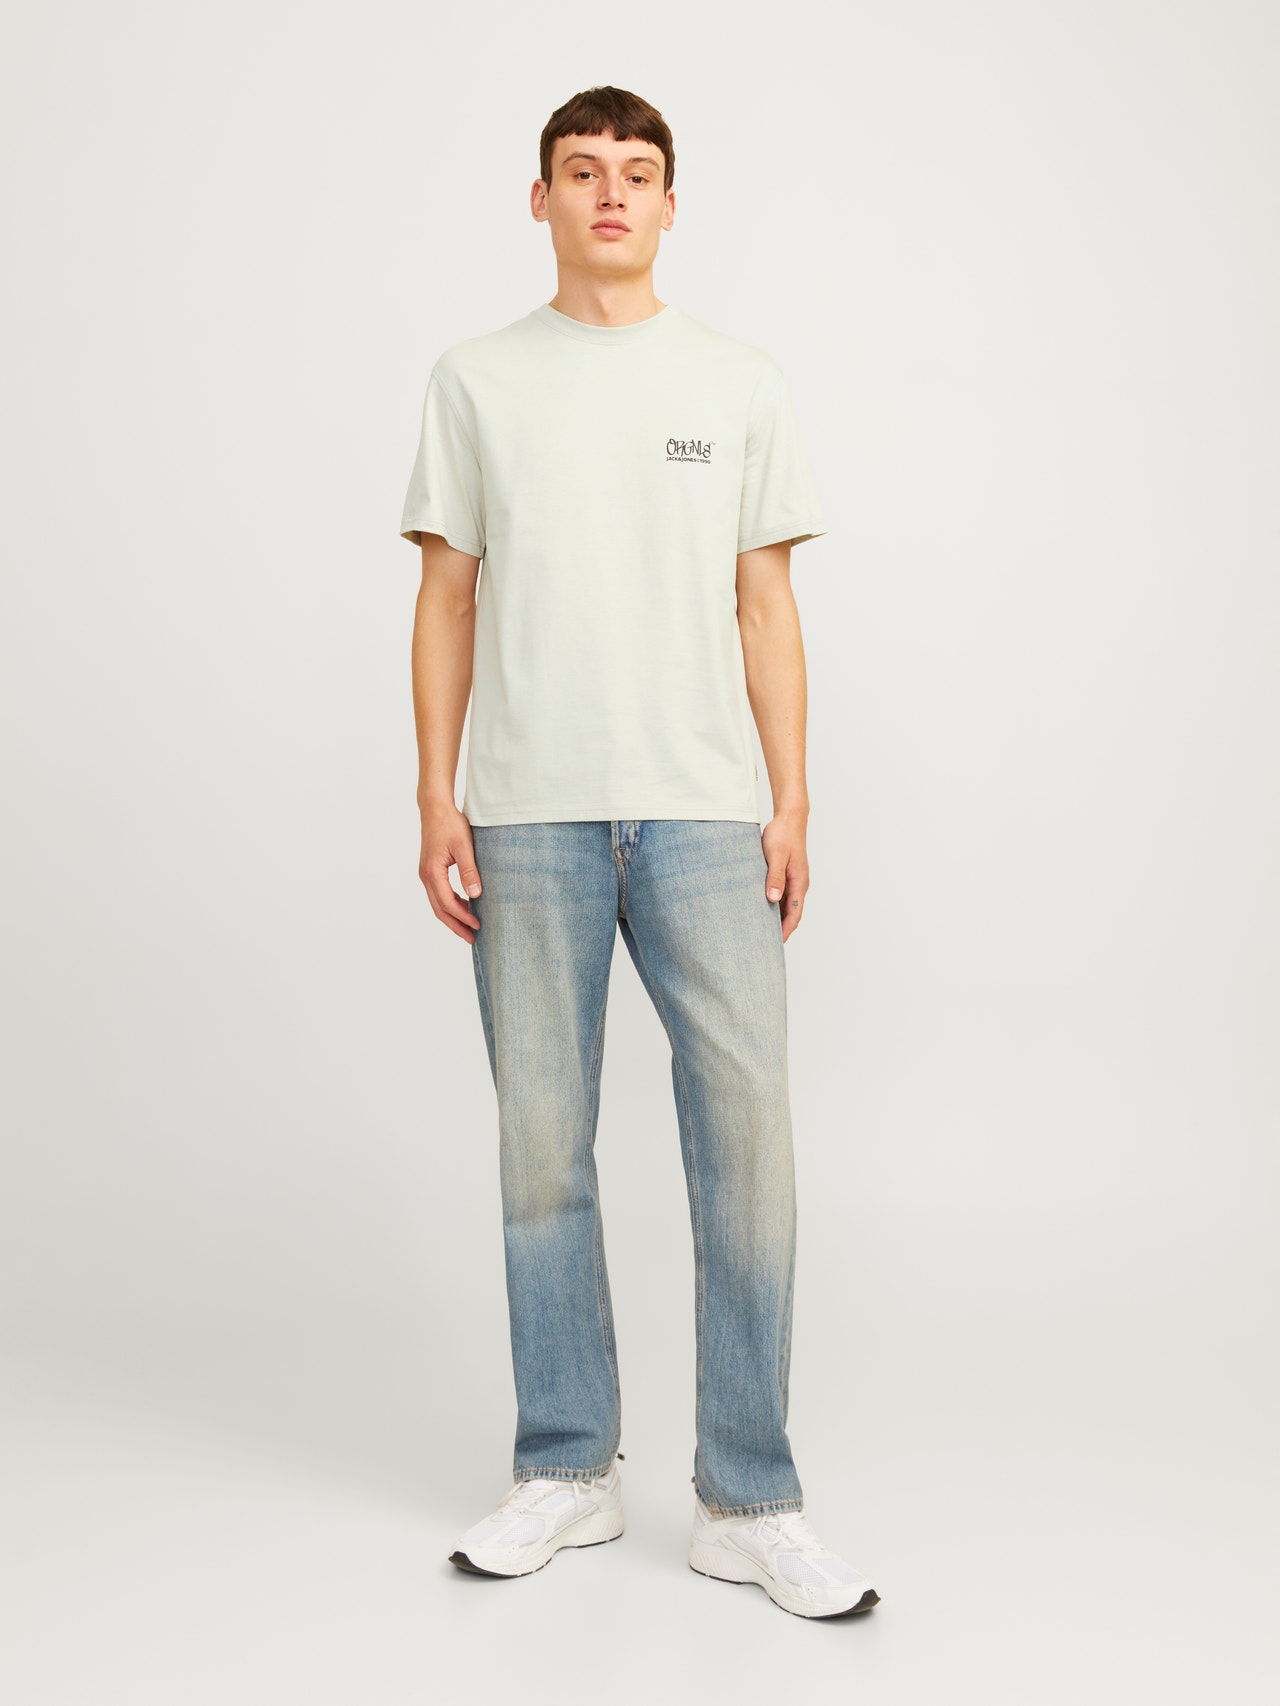 Jack & Jones Relaxed Fit Crew neck T-Shirt -Mineral Gray - 12262673